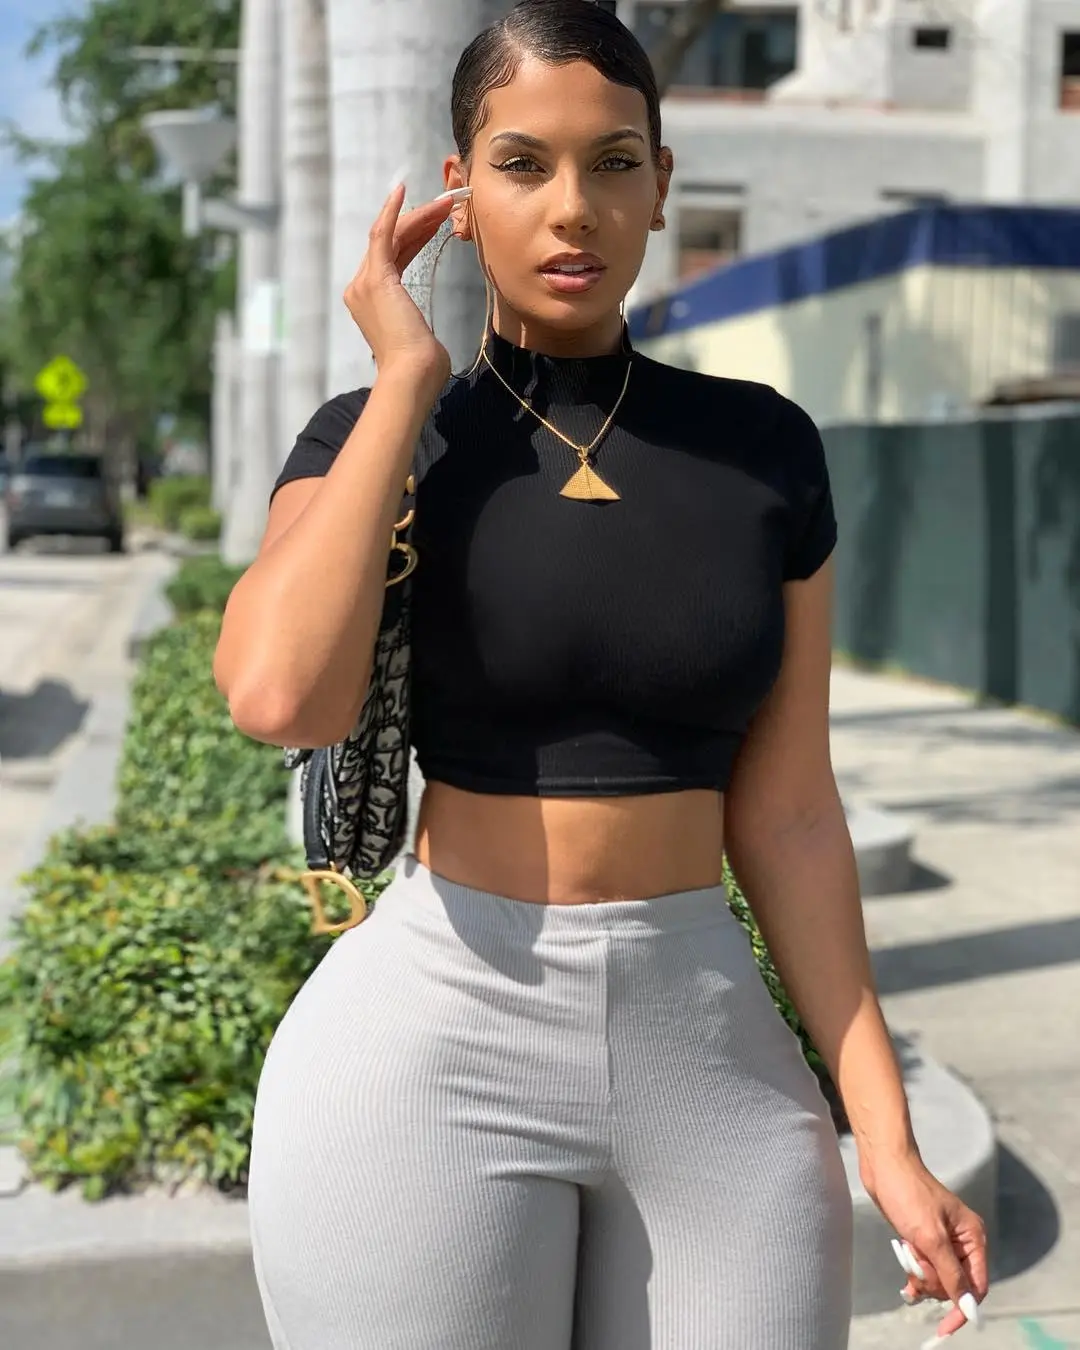 Who Is Amirah Dyme? Age, Bio, Career And More Of The Famous Instagram Model